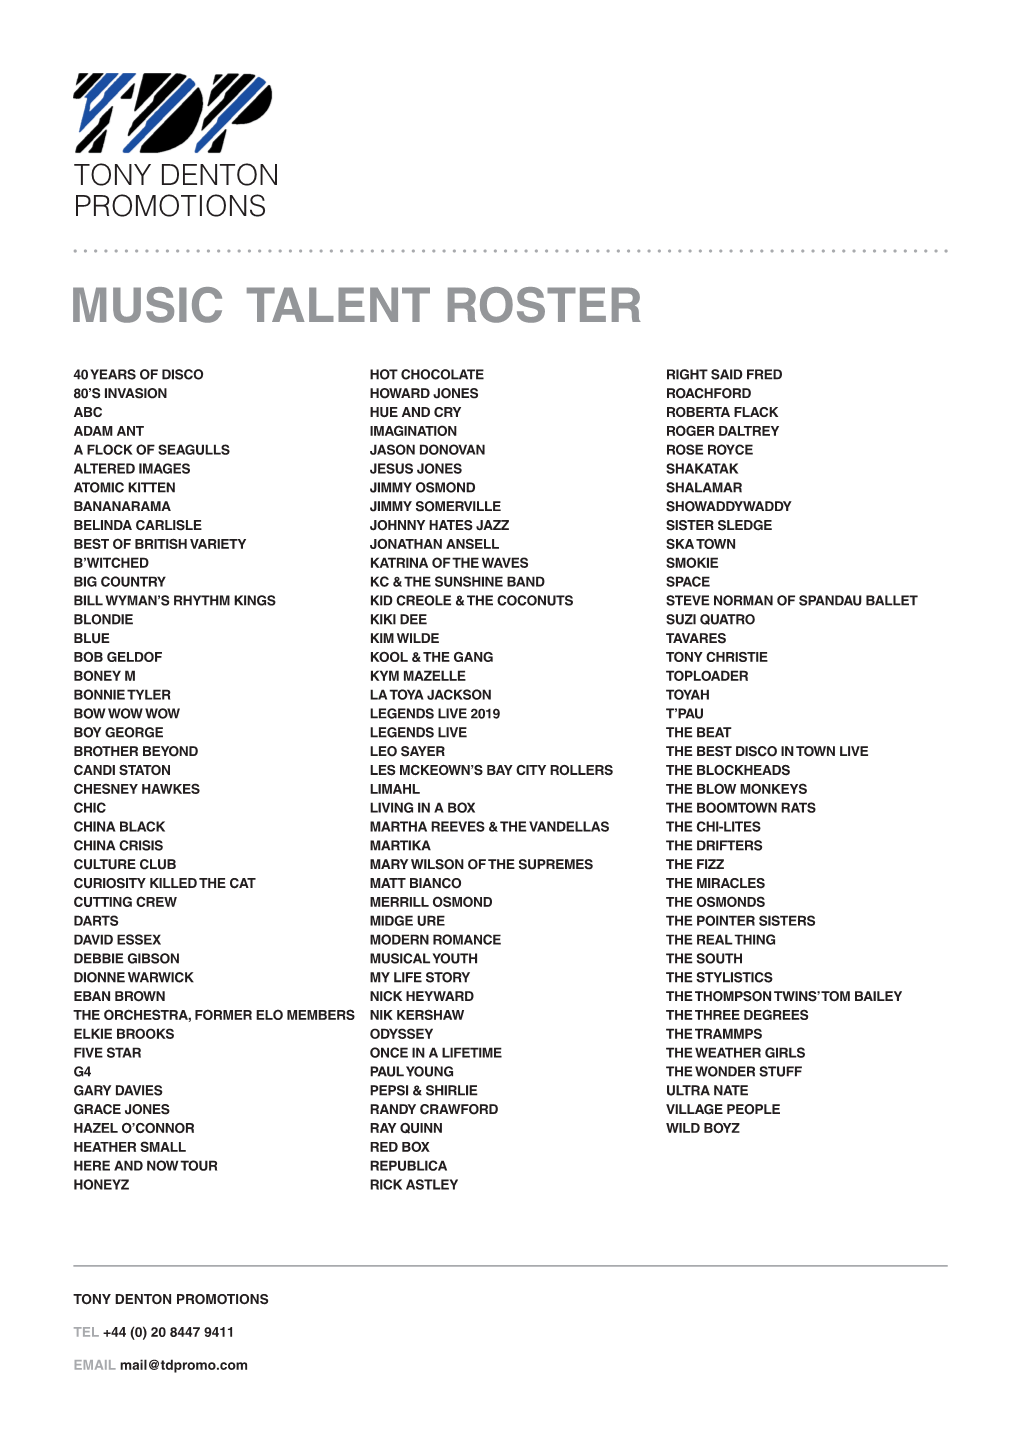 Music Talent Roster